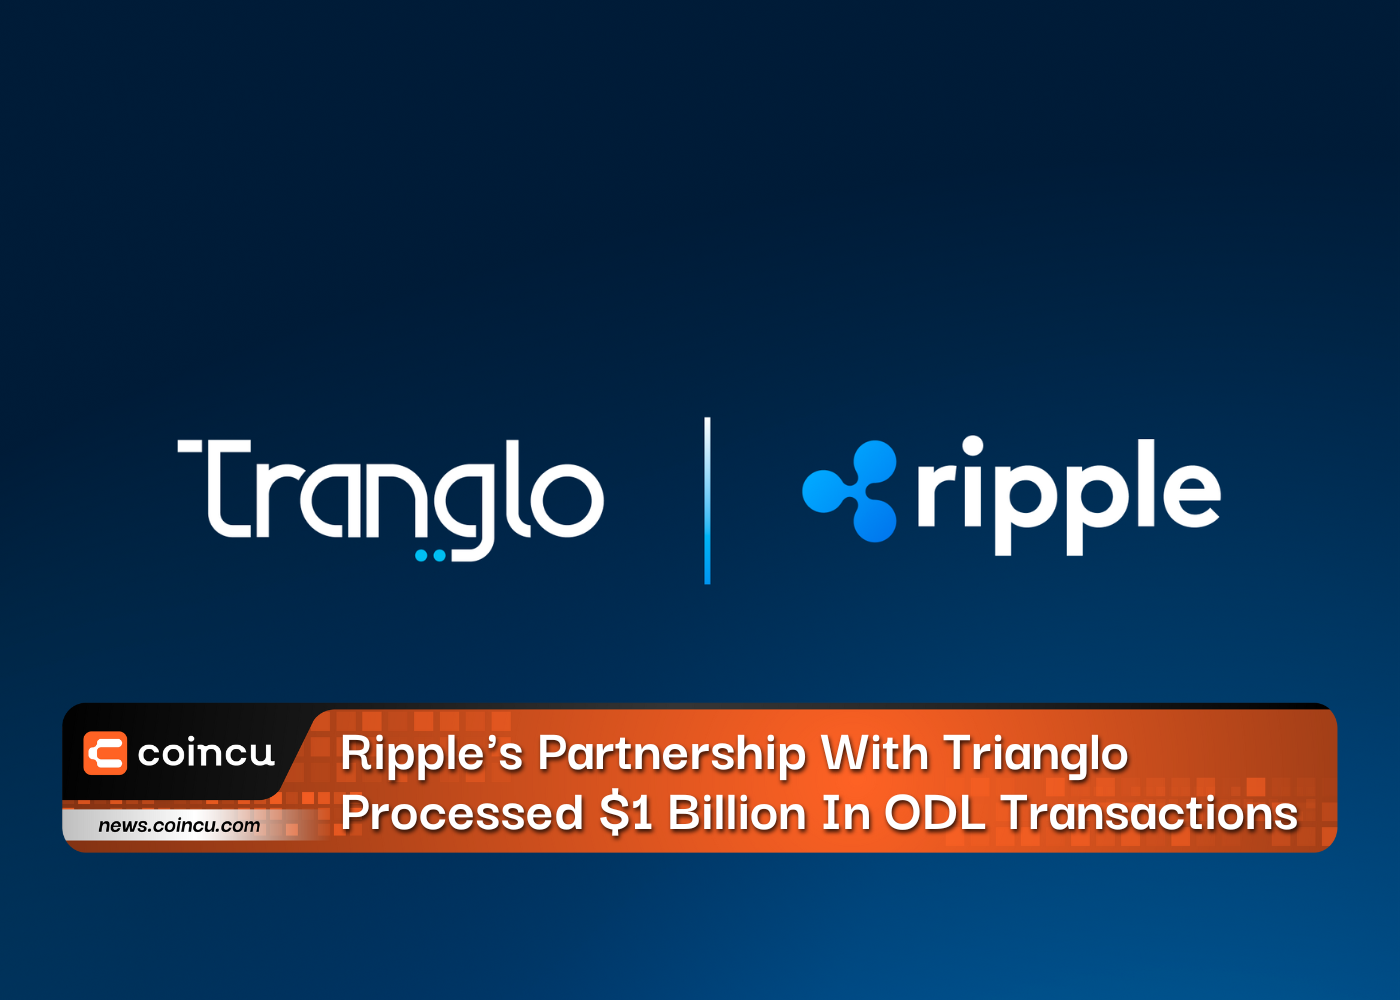 Ripple's Partnership With Trianglo Processed Over $1 Billion In ODL Transactions